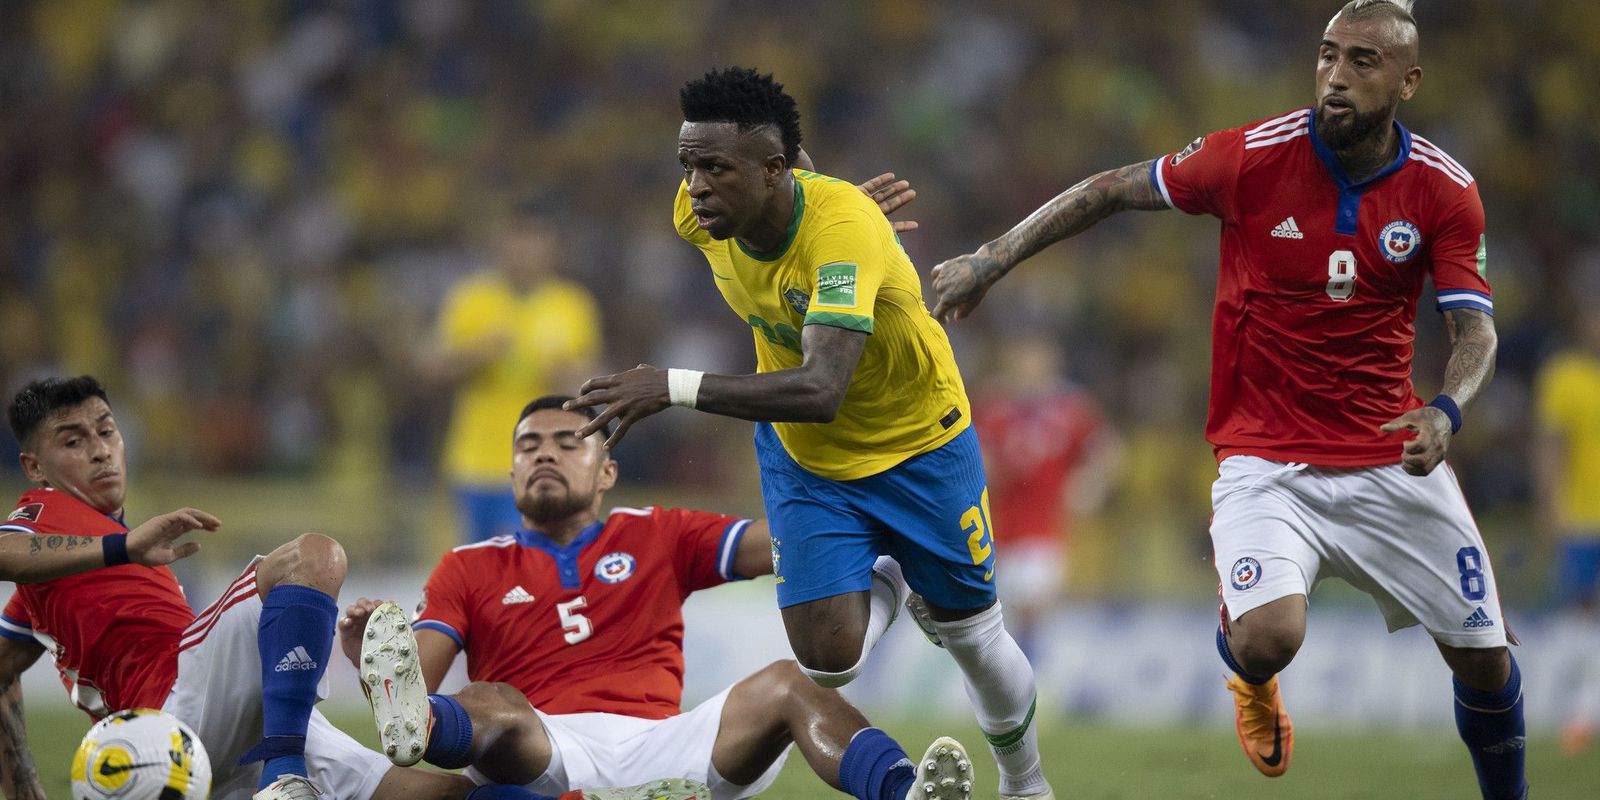 National team thrashes Chile 4-0 in the last game in Brazil before the World Cup